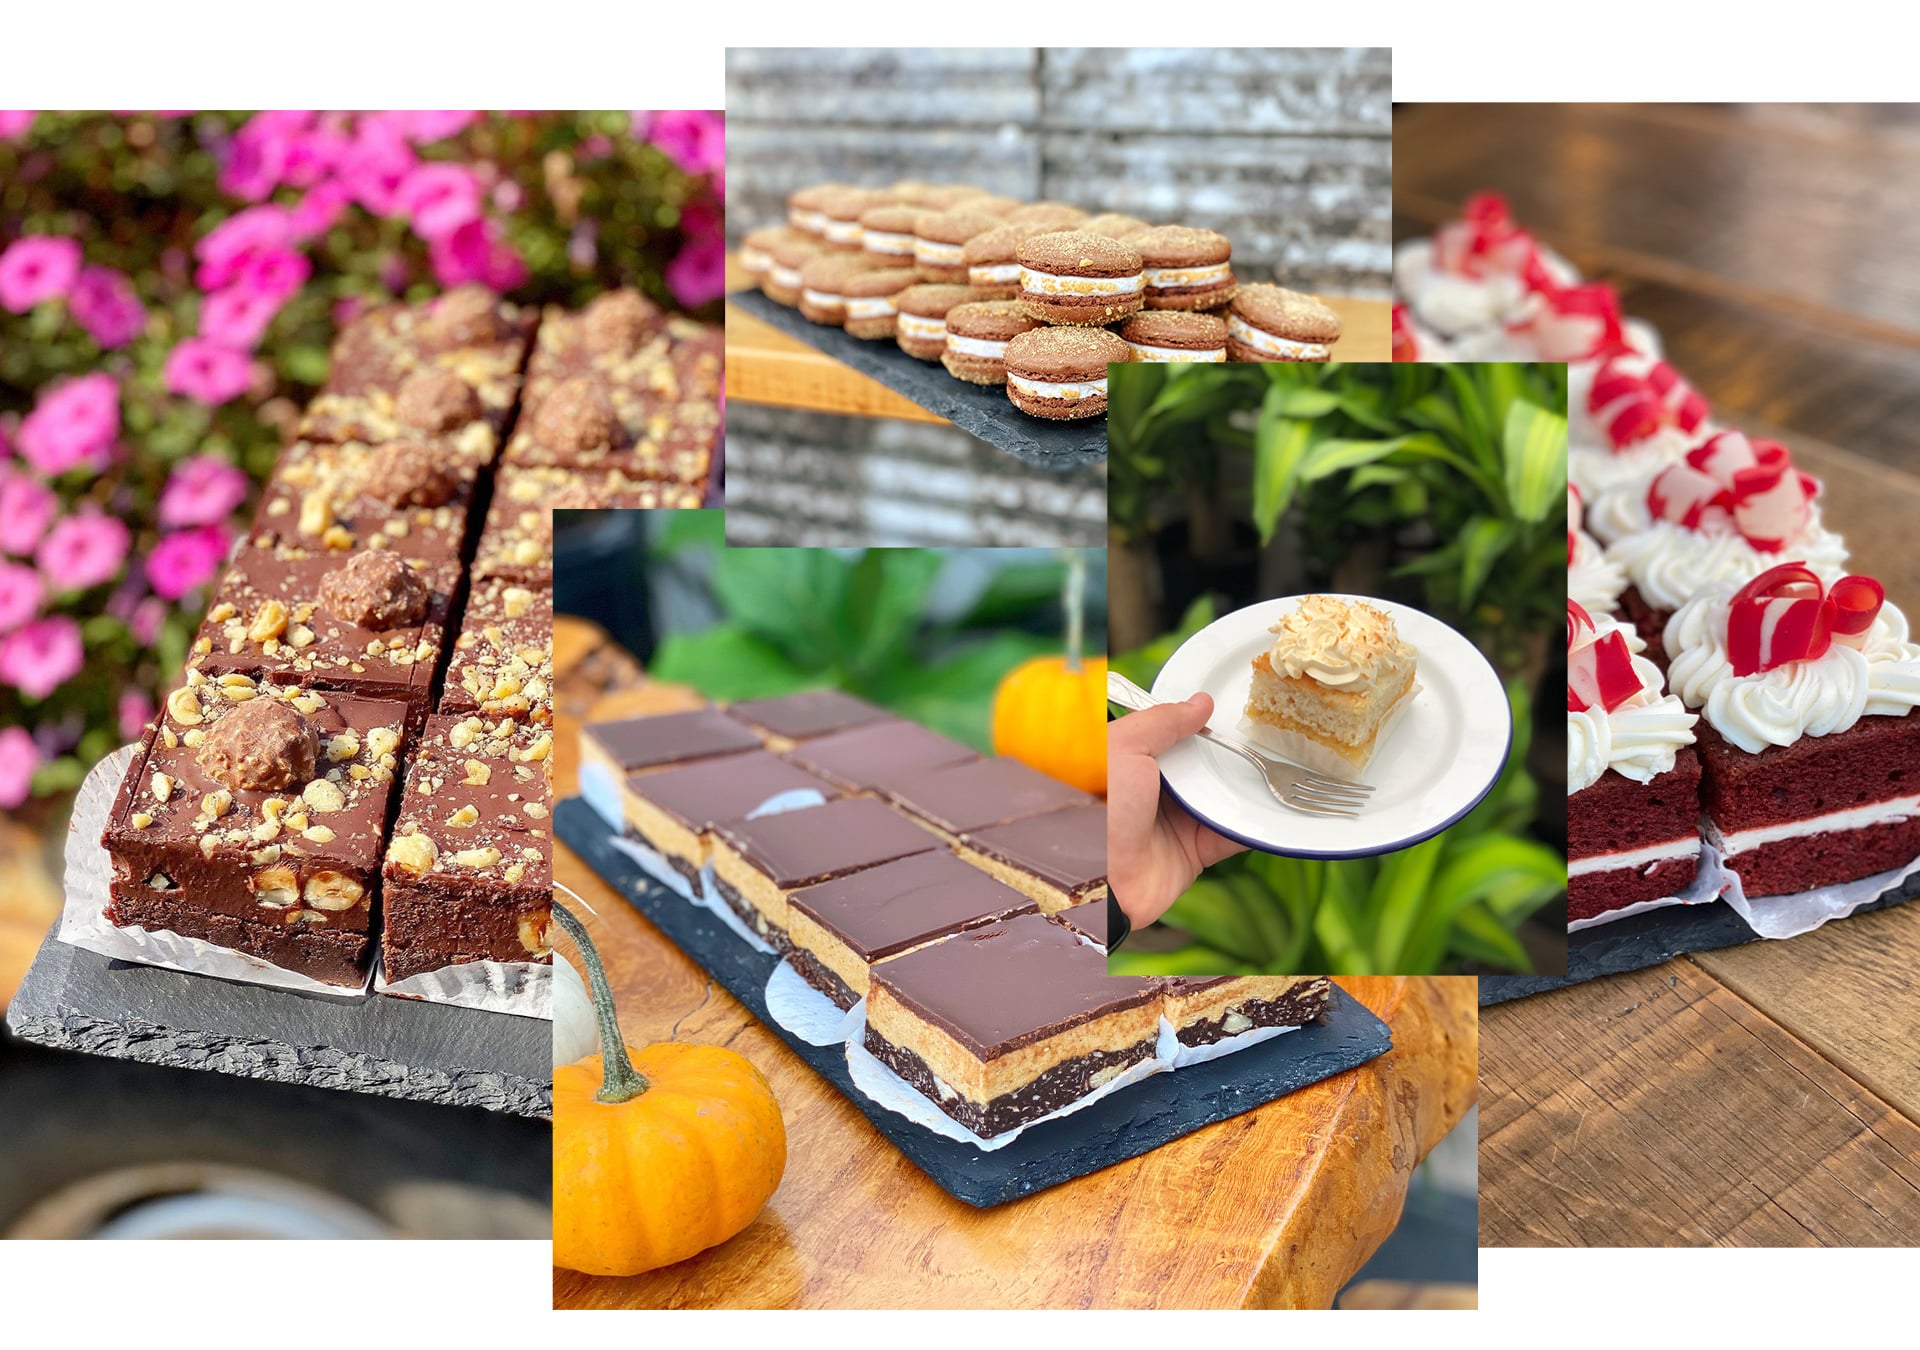 Image collage of Squares and Cakes at the Watering Can Flower Market.